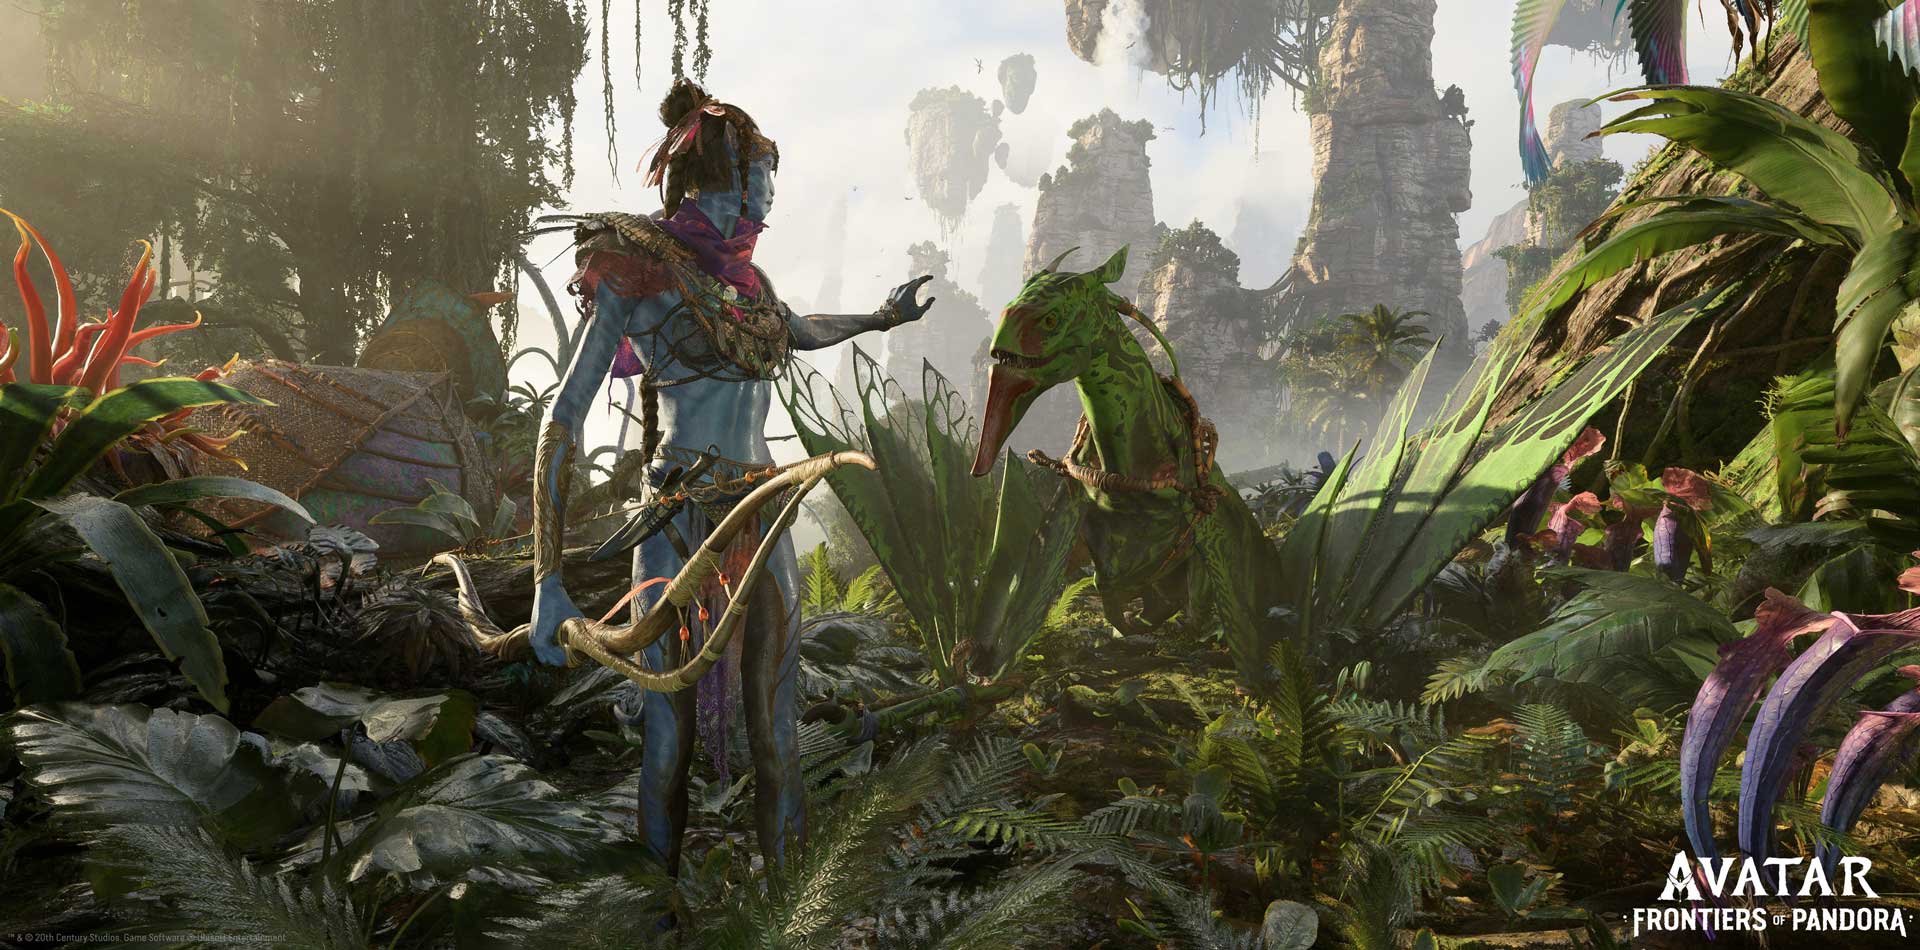 Avatar: Frontiers of Pandora Reportedly Set to Release on 18 November